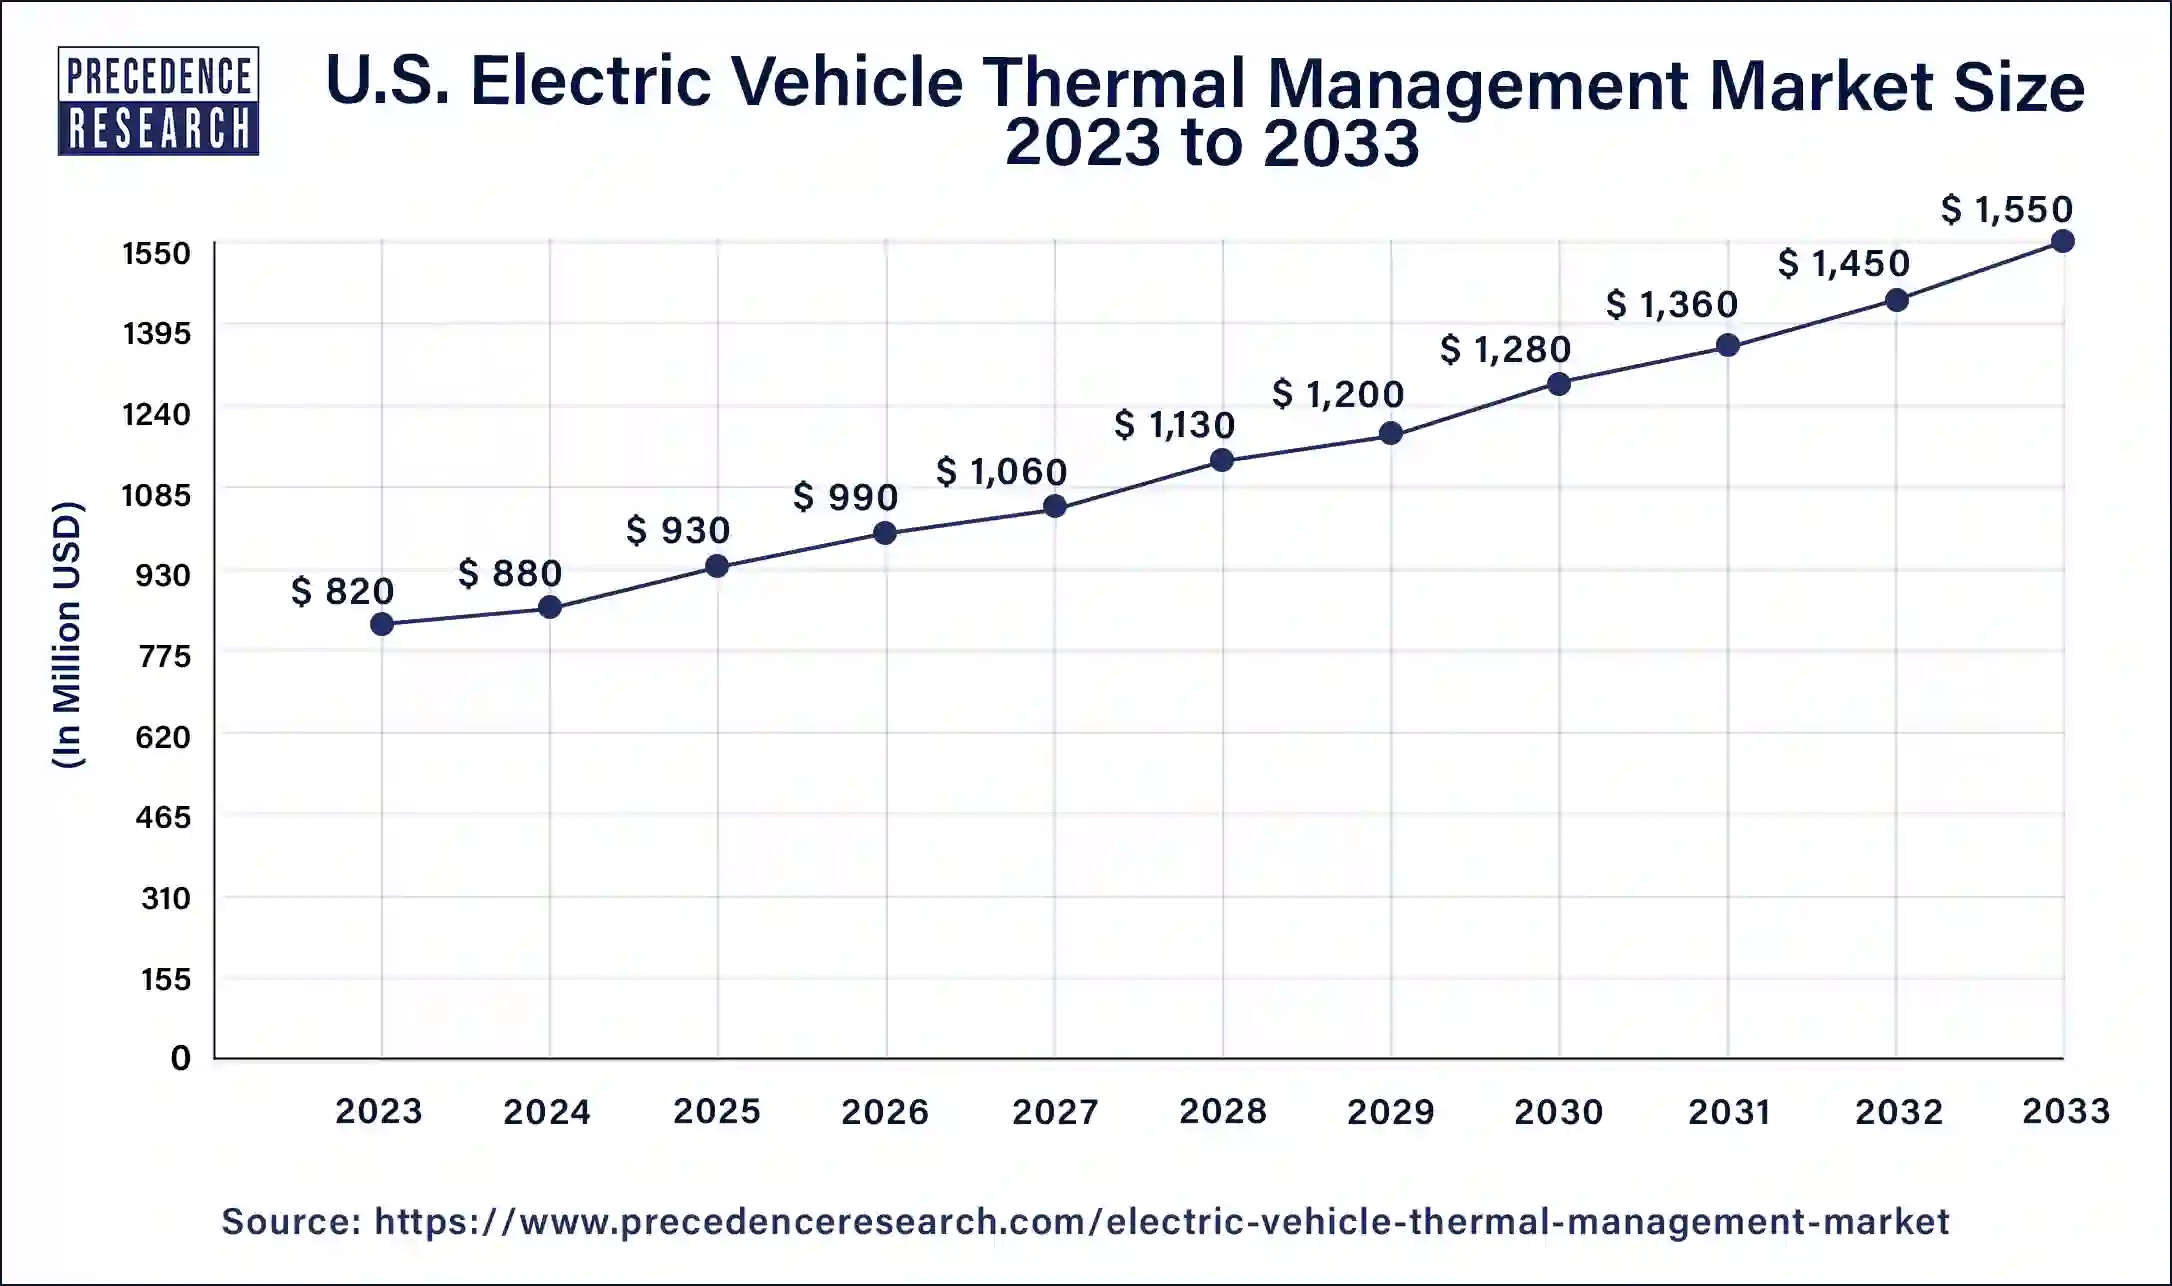 U.S. Electric Vehicle Thermal Management Market Size 2024 to 2033